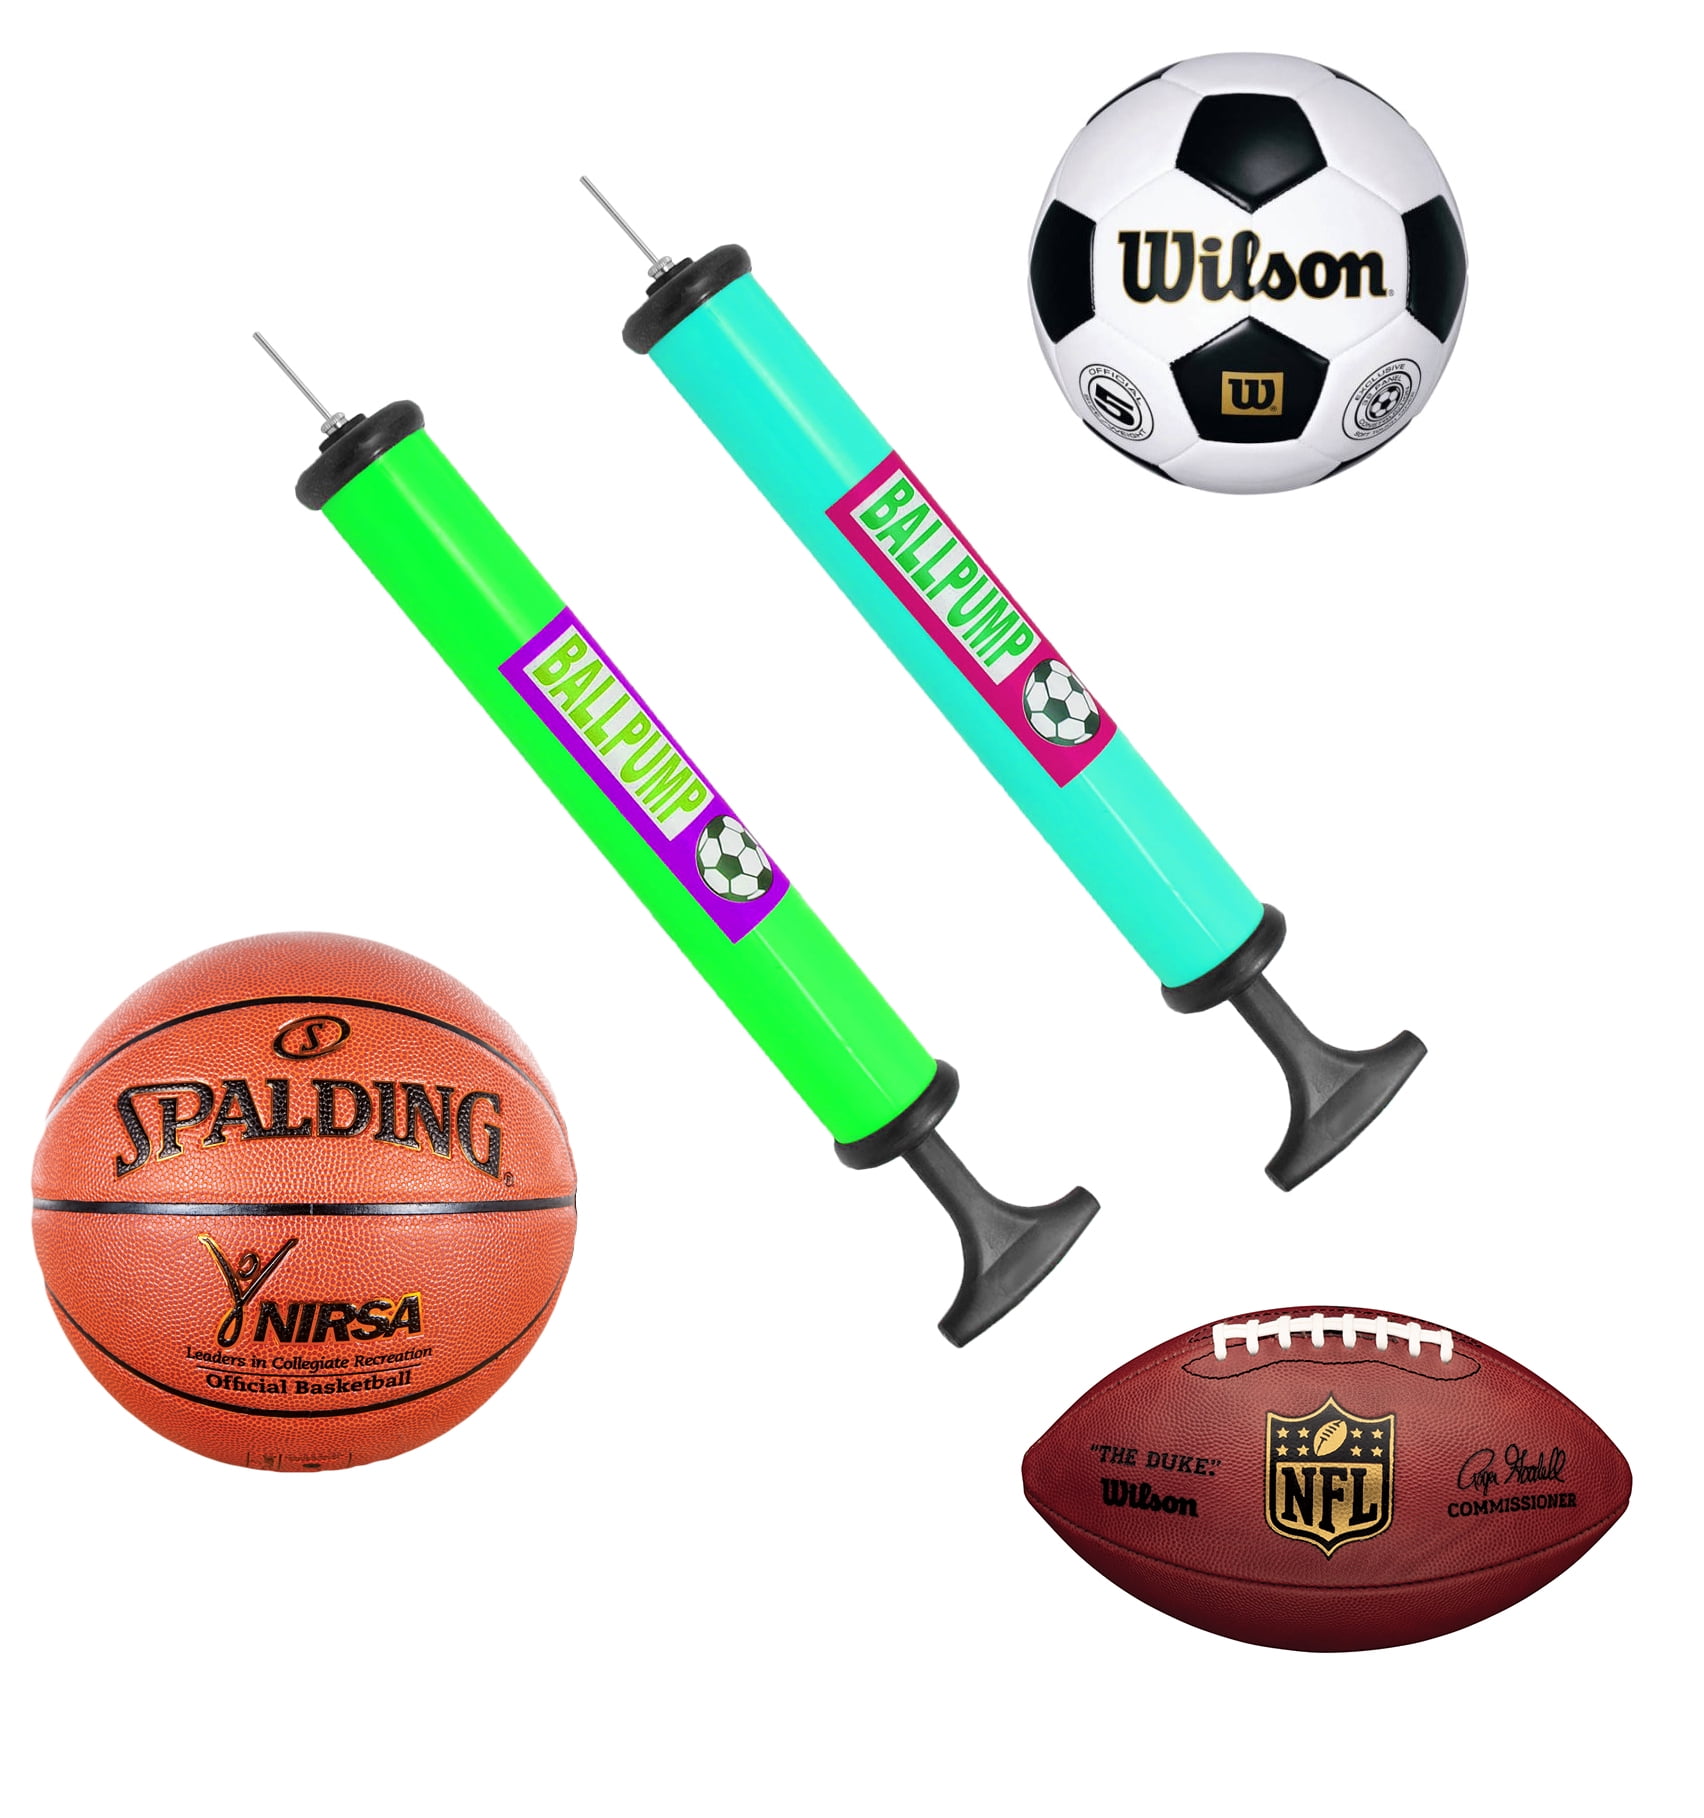 Have a question about Winado 10 in. Hand Air Pump for Bicycle Basketball  Football Soccer Ball Needle? - Pg 1 - The Home Depot